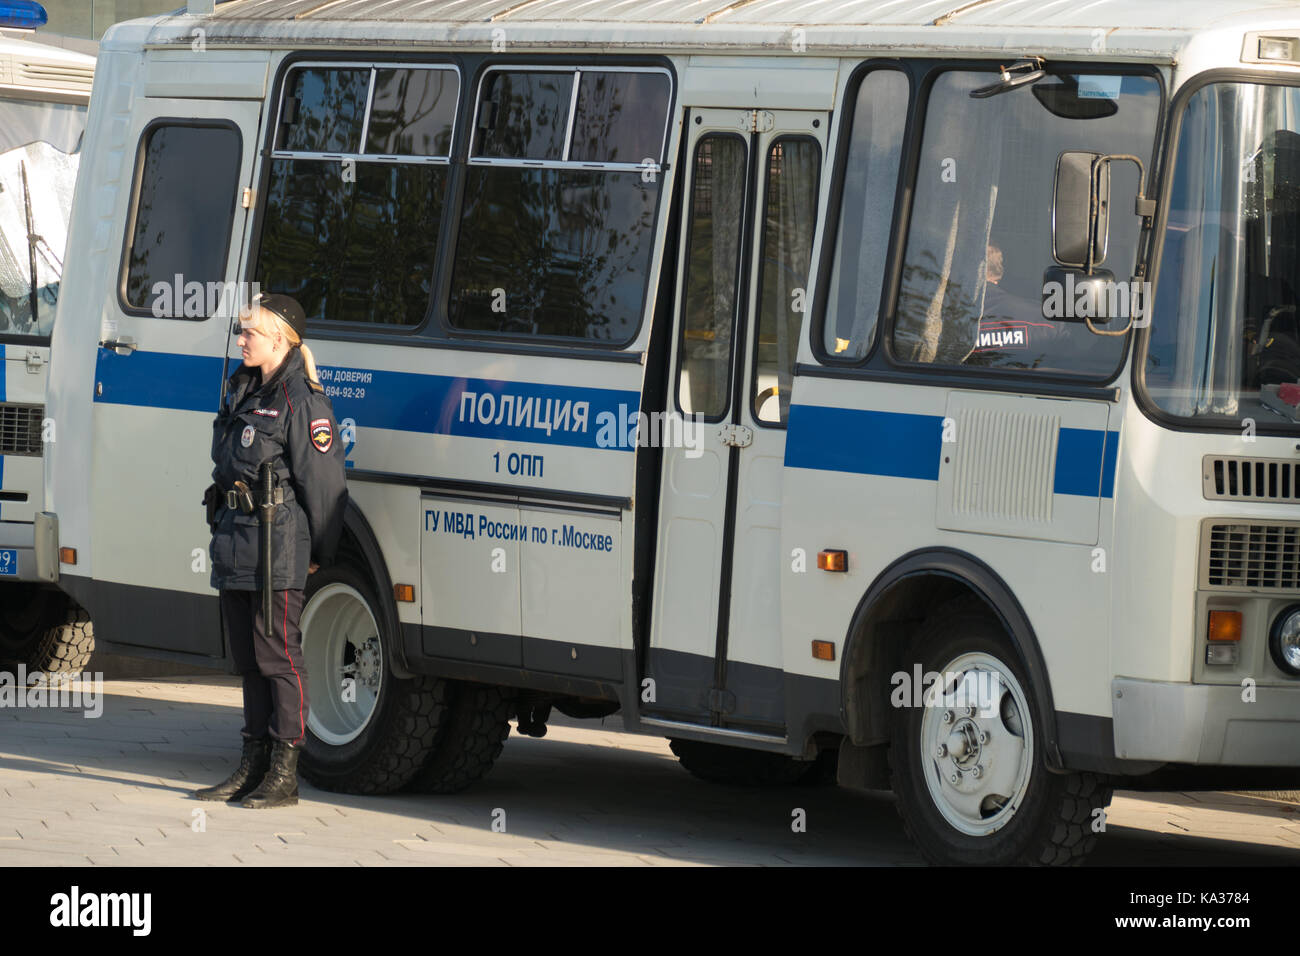 police bus and lady police officer near Stock Photo